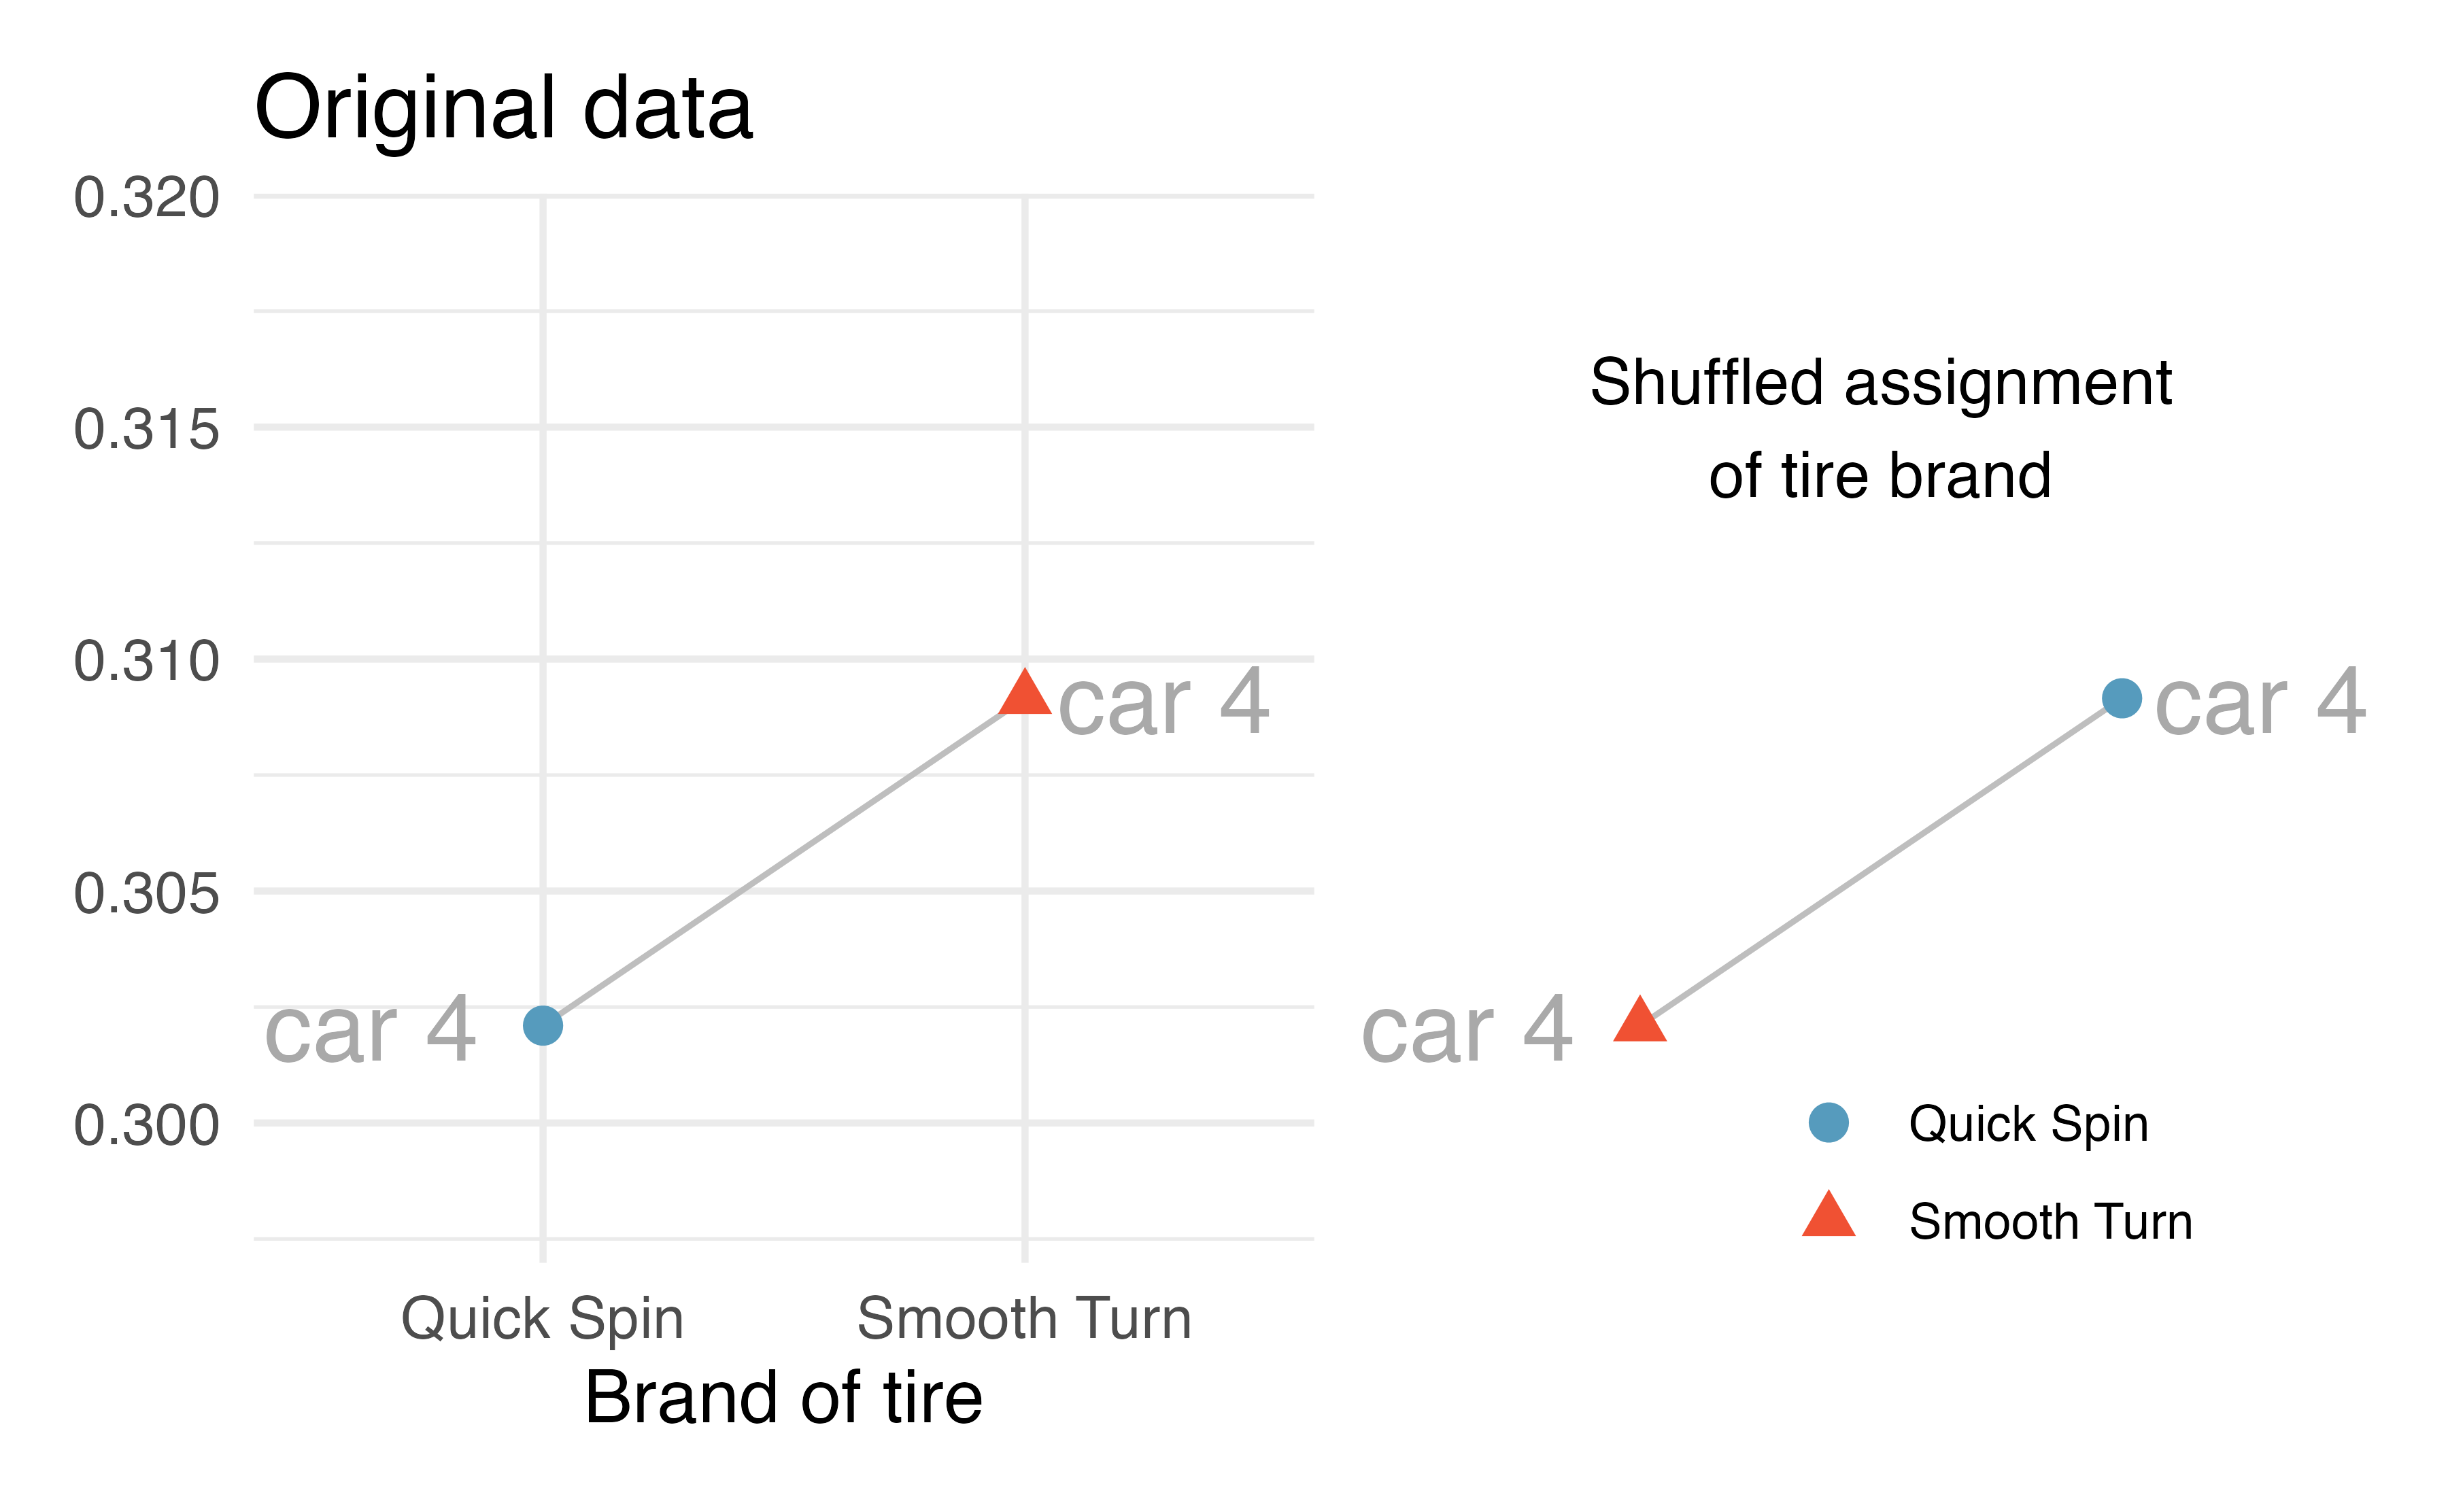 The 4th car: the tire brand was randomly permuted, and in the randomization calculation, the measurements (in cm) ended up in different groups.